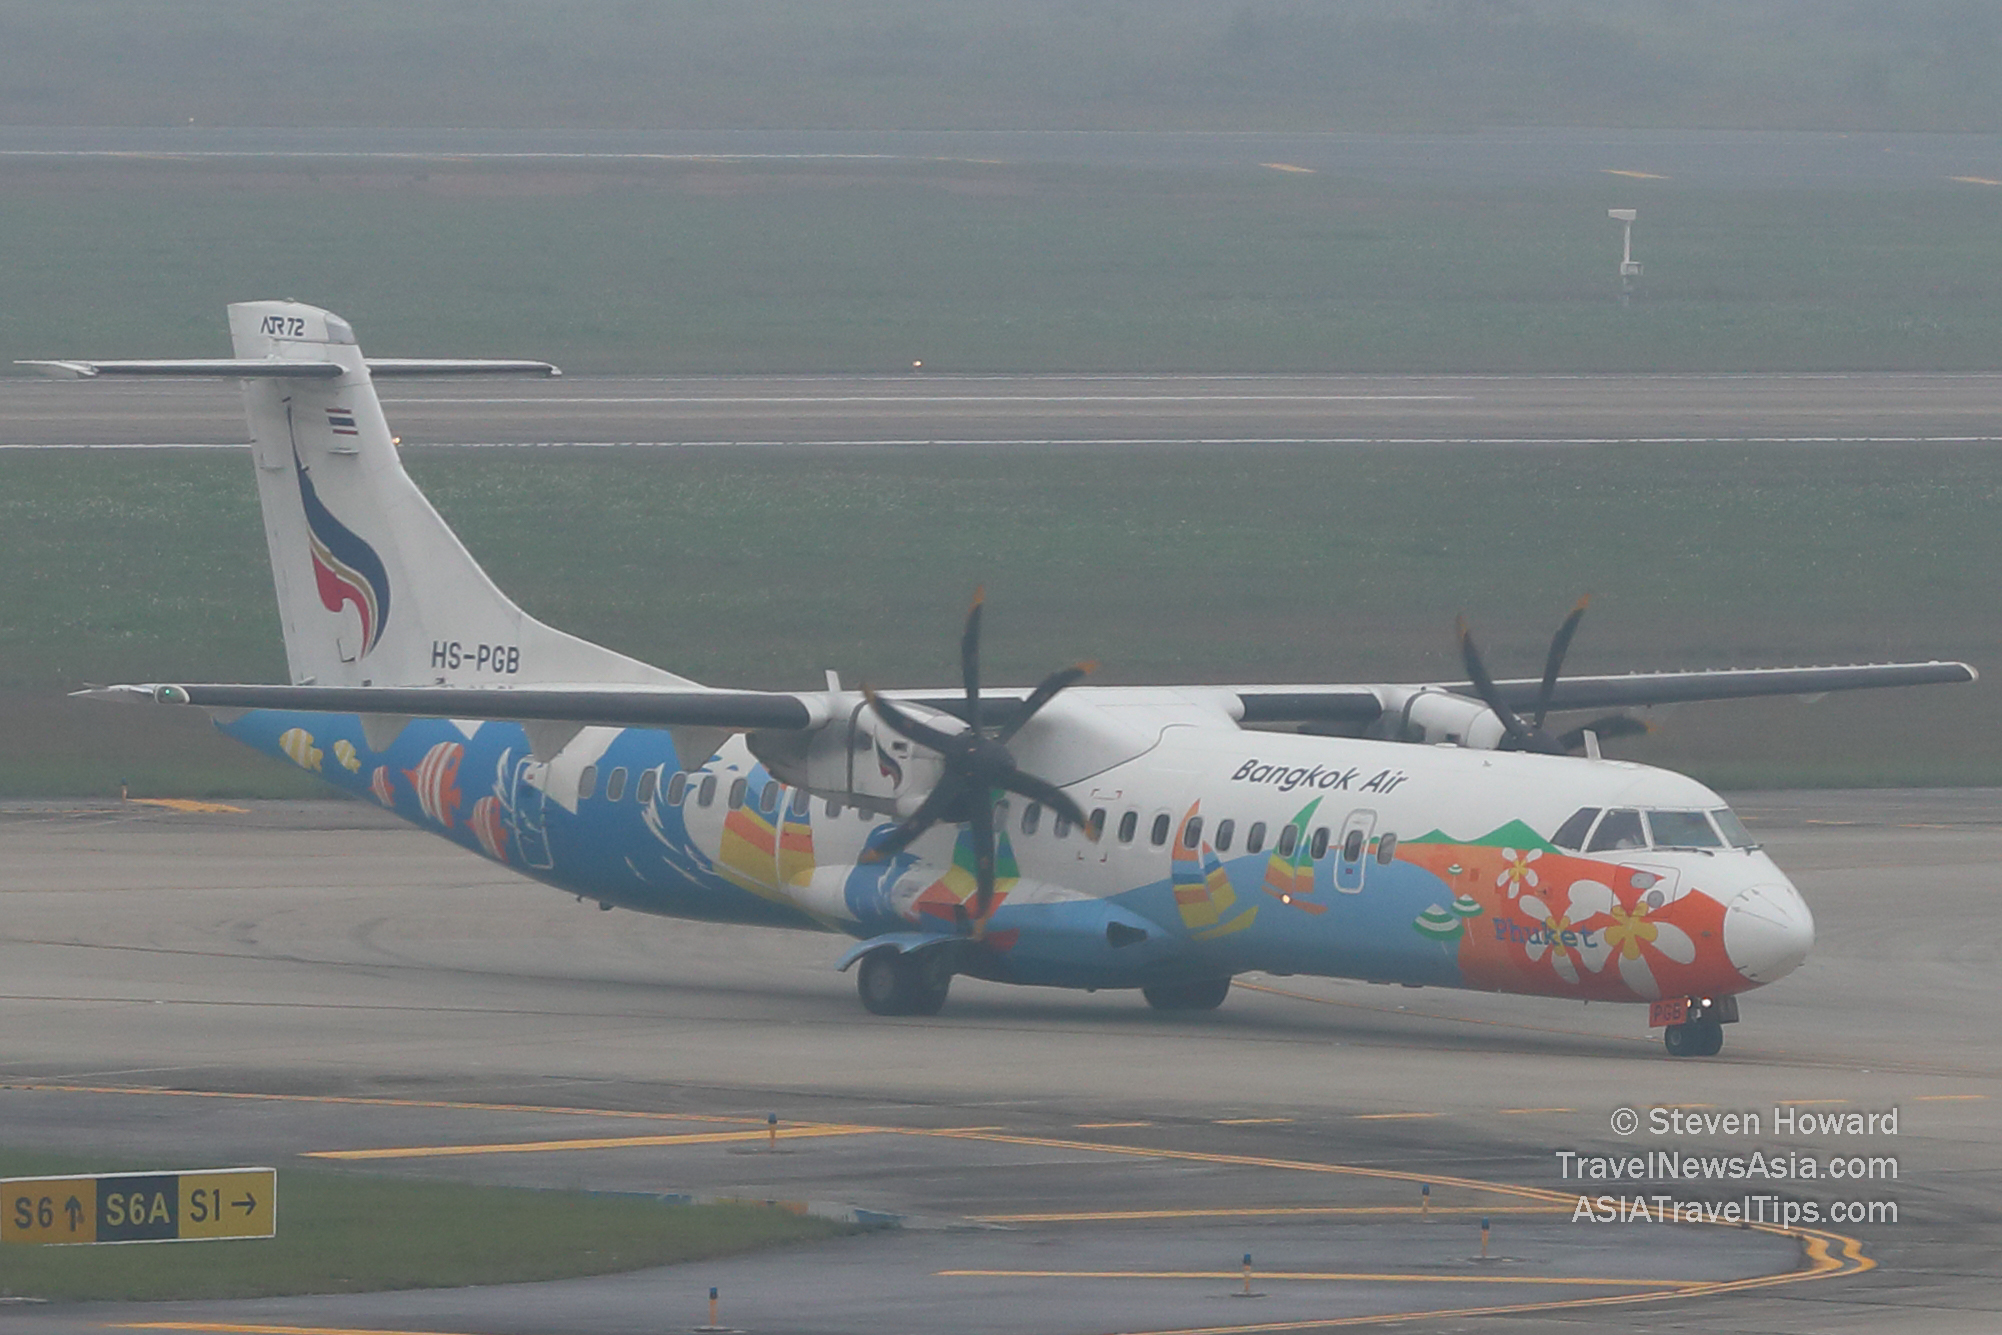 Bangkok Airways ATR 72-500 reg: HS-PGB. Picture by Steven Howard of TravelNewsAsia.com Click to enlarge.